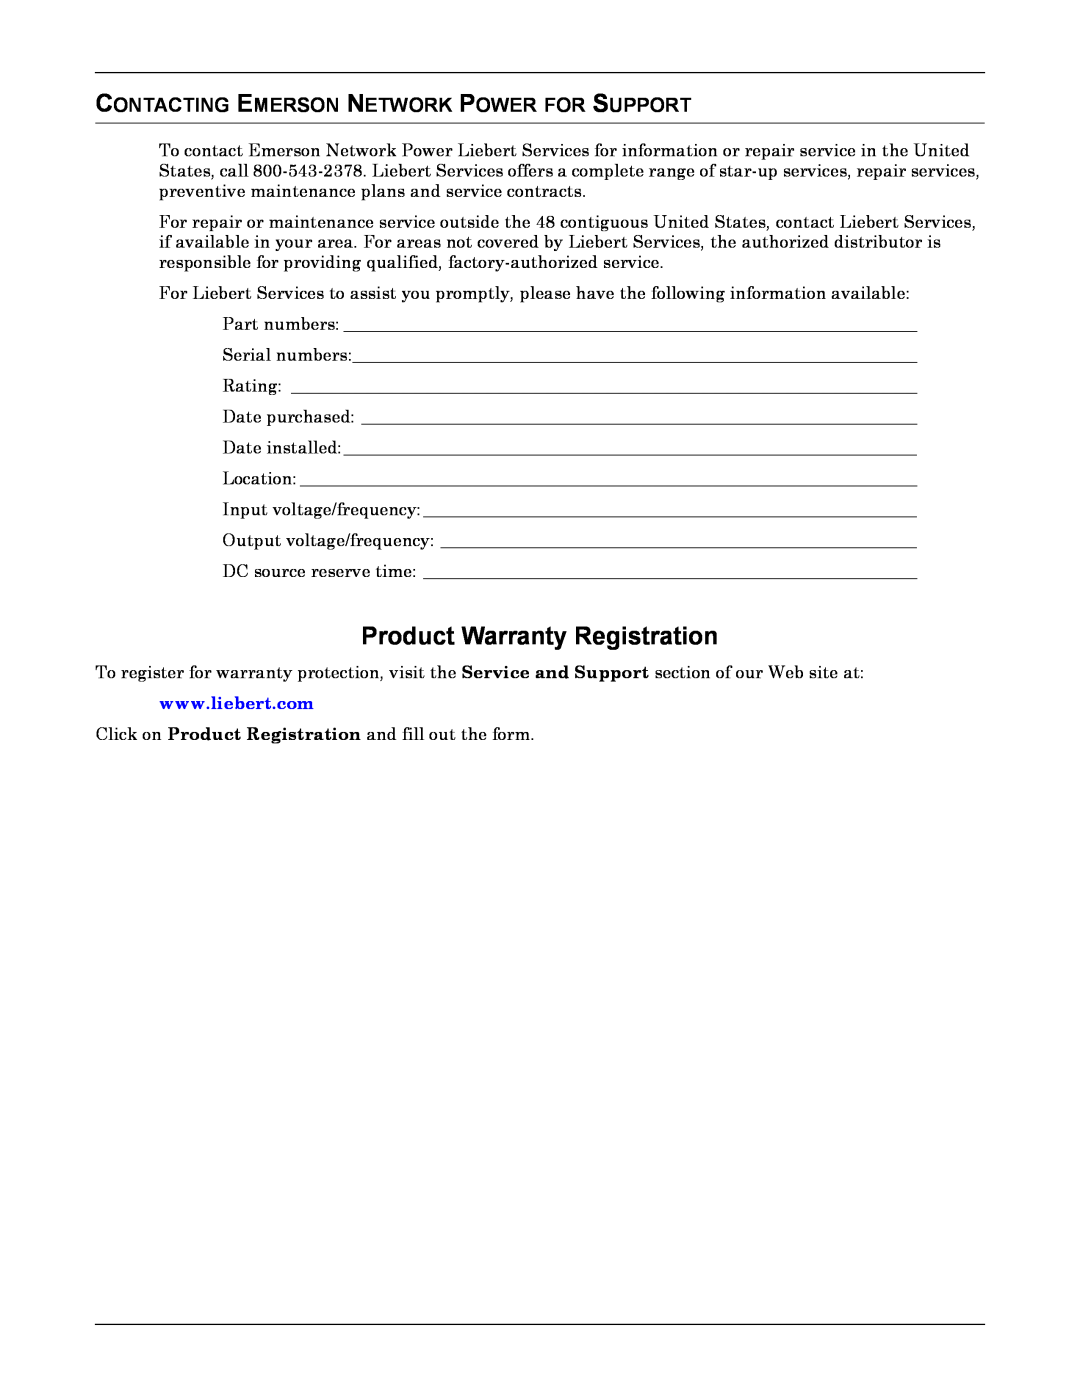 Emerson NX manual Product Warranty Registration, Contacting Emerson Network Power For Support 